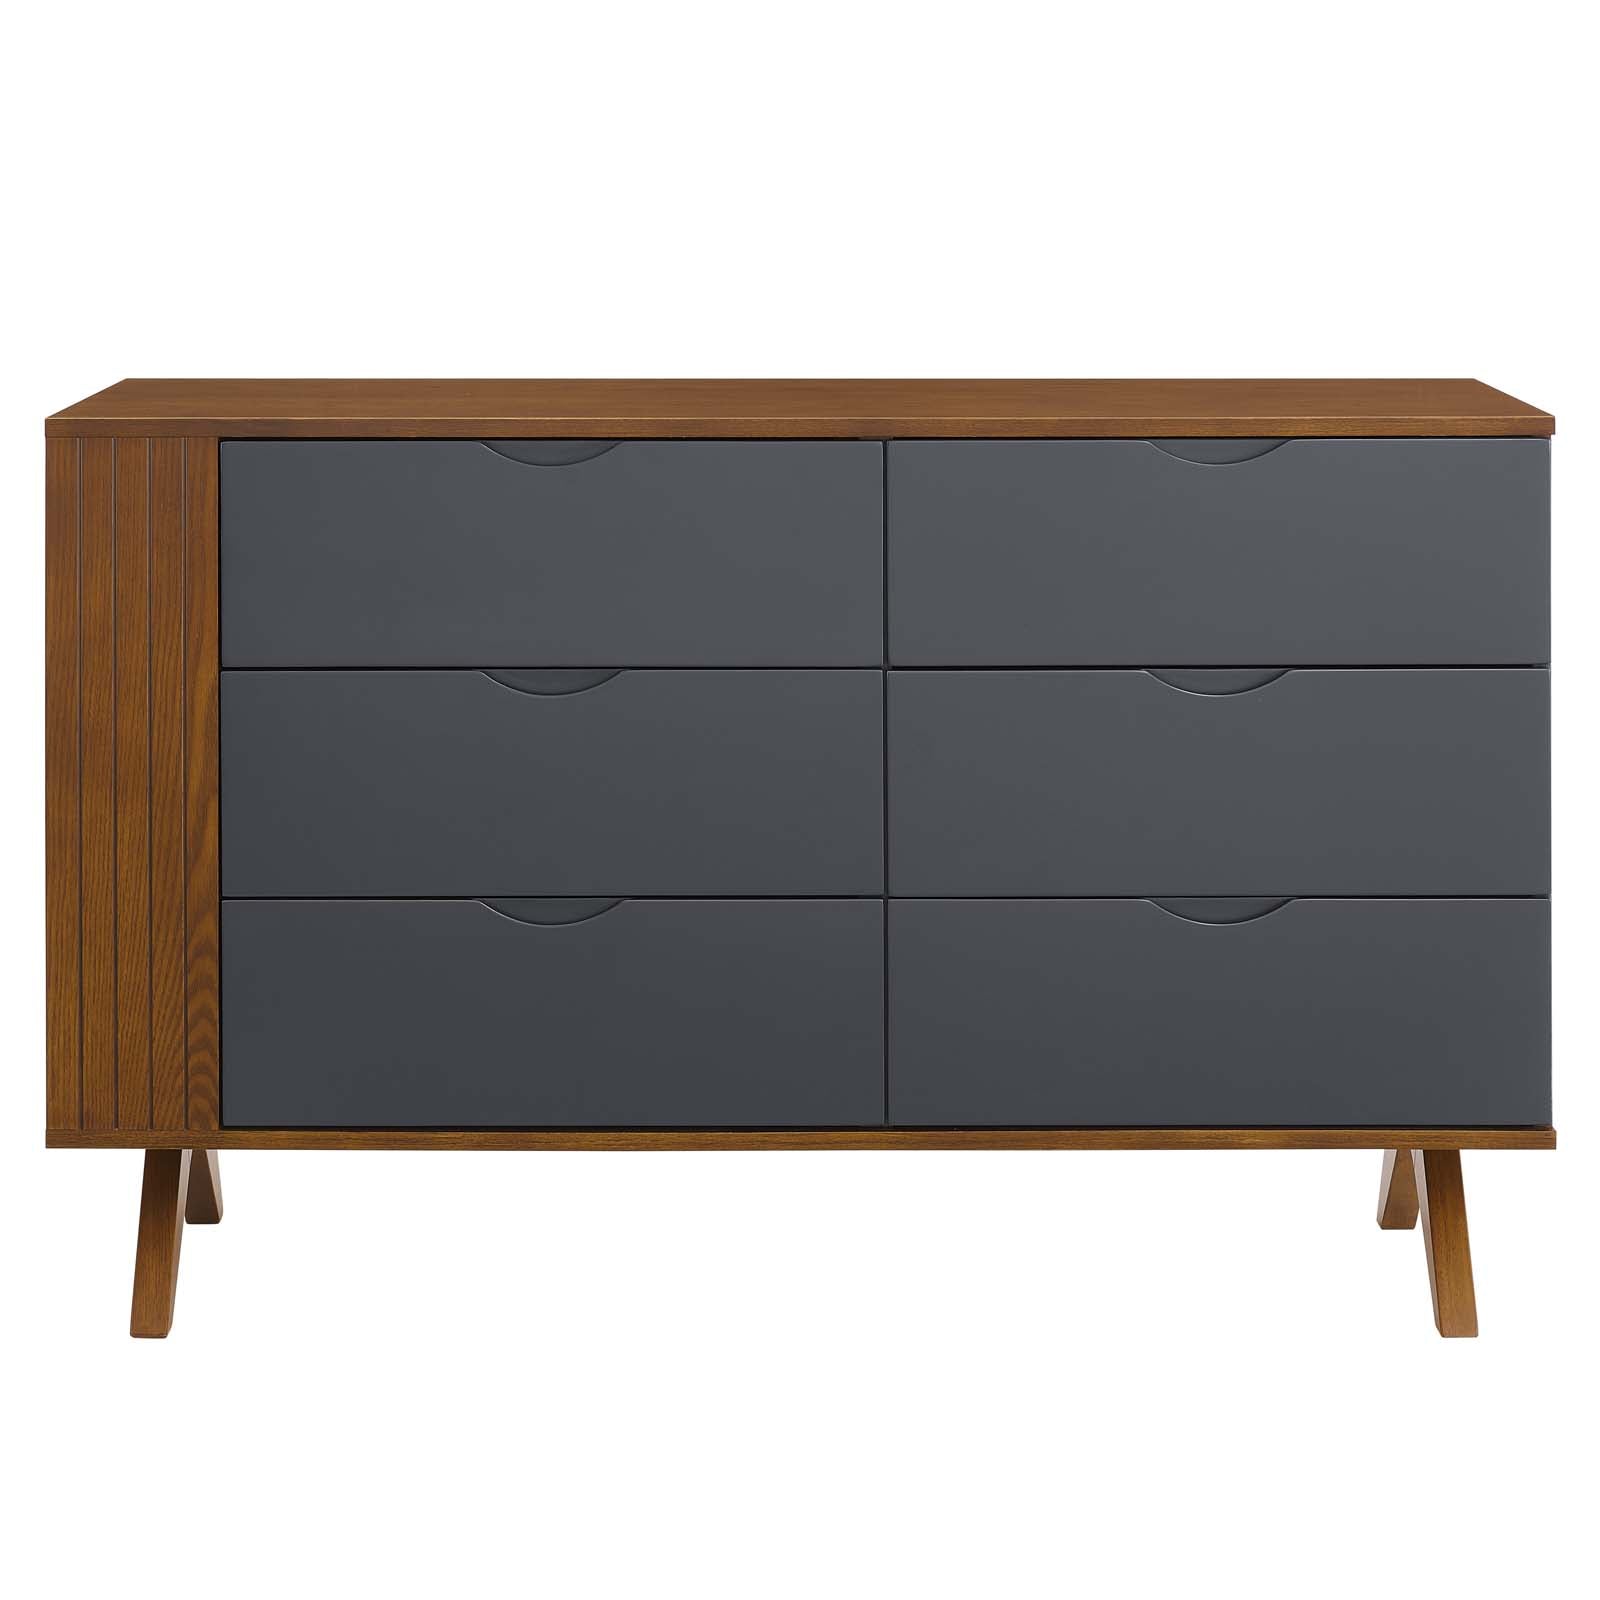 Dylan Dresser and Mirror - East Shore Modern Home Furnishings